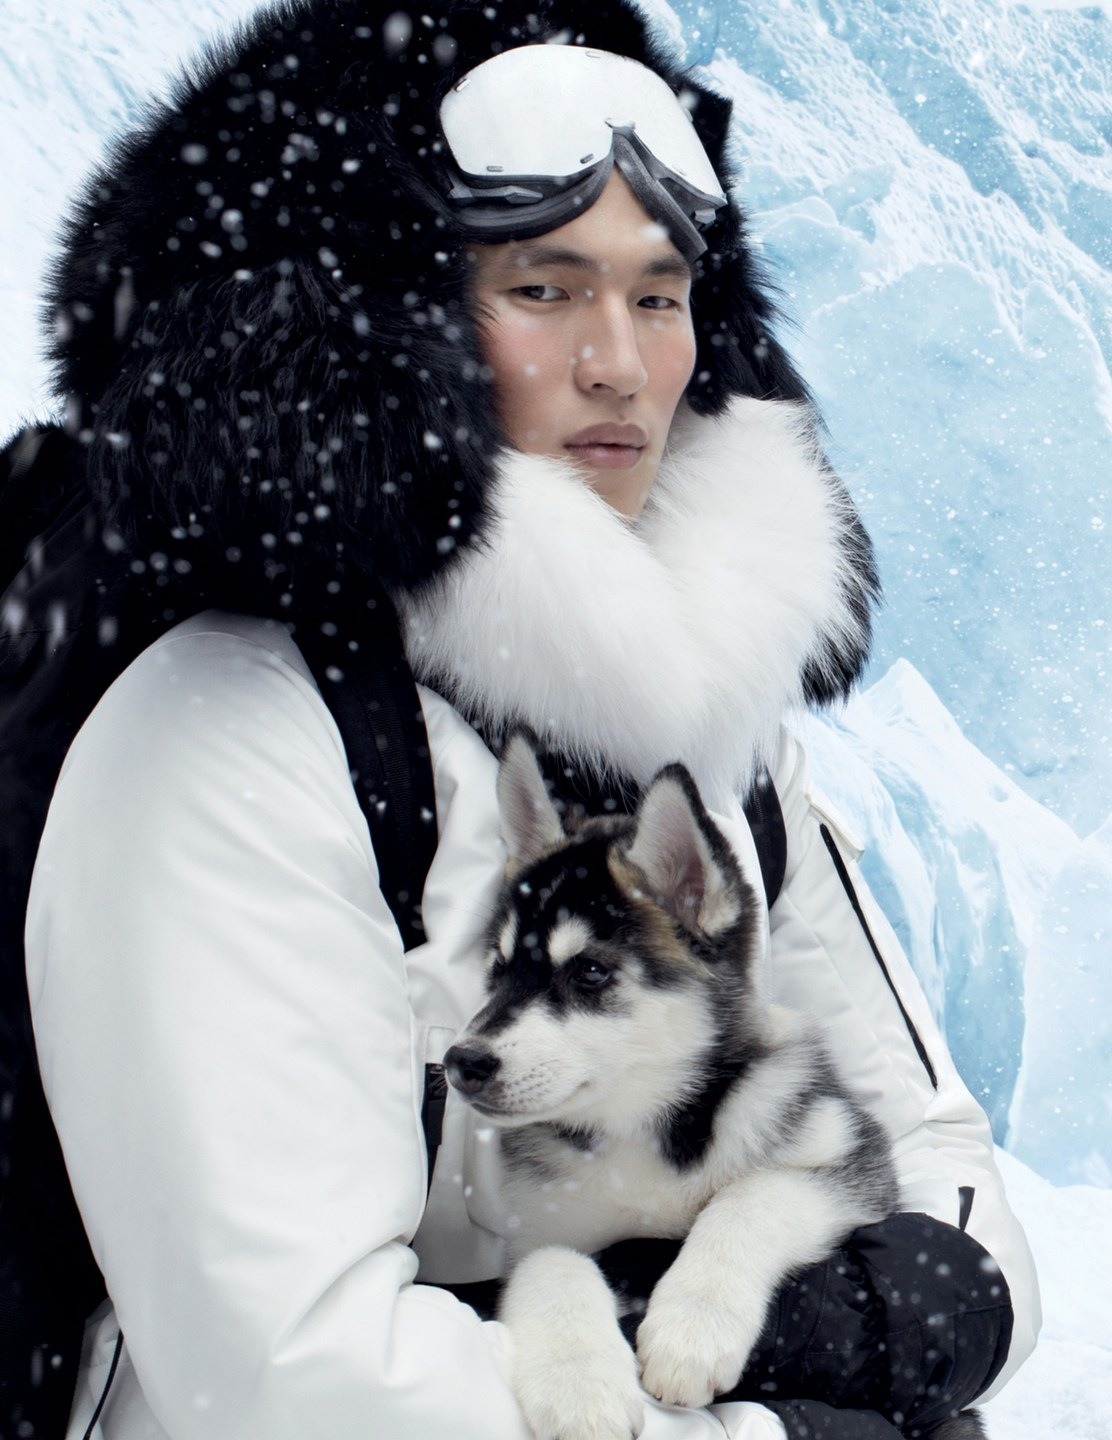 bodyfluids:</p><br /><br /><br /> <p>Jae Yoo for Moncler Gamme Rouge Fall 2013, photographed by Steven Meisel<br /><br /><br /><br /> 